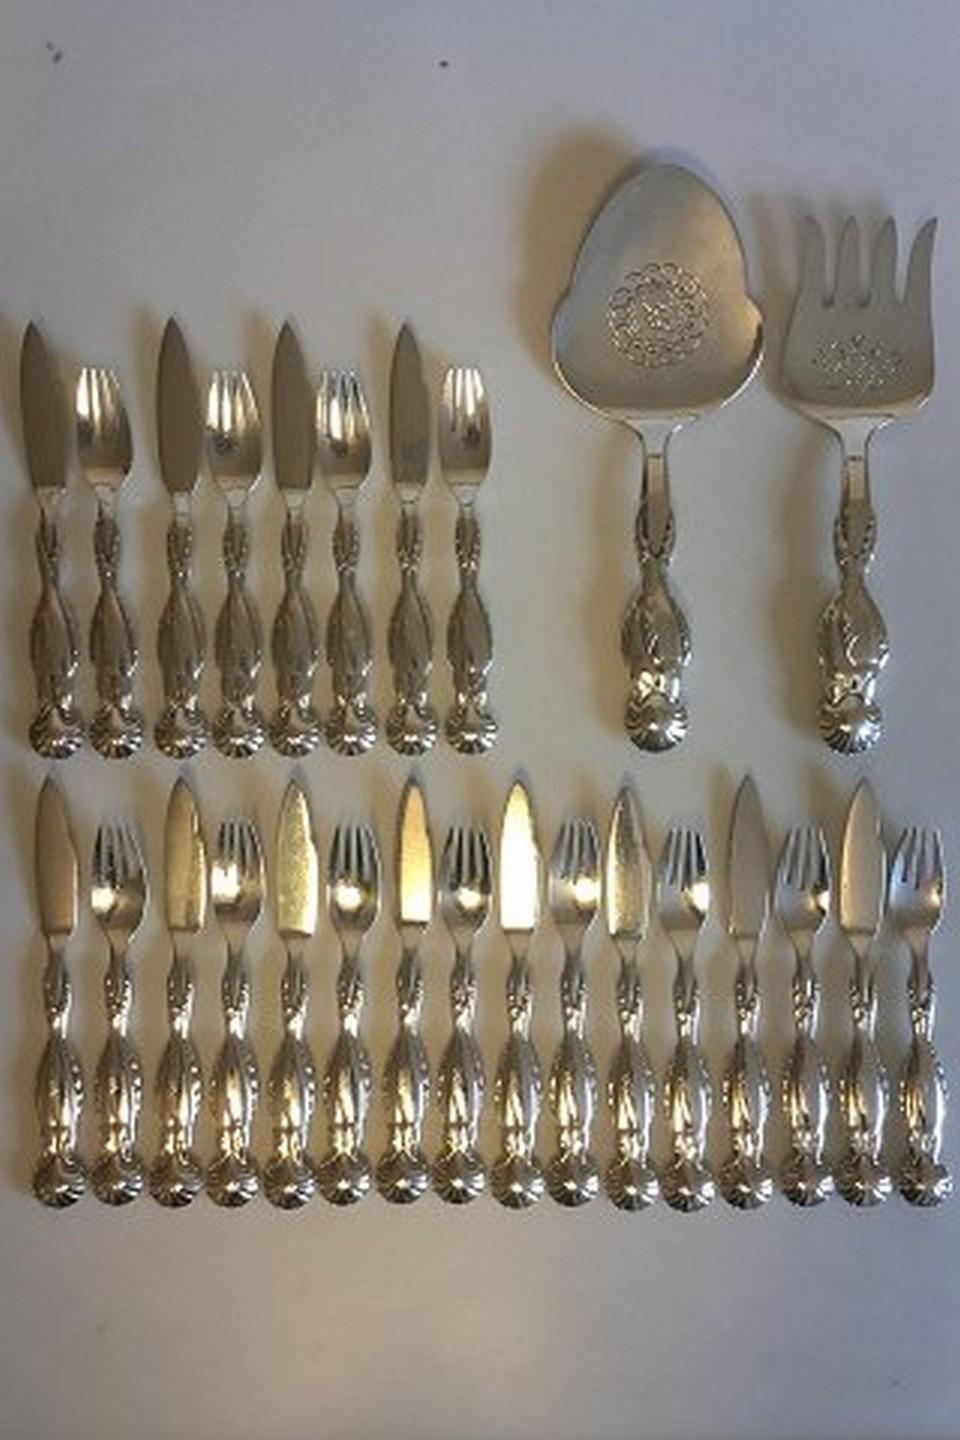 Georg Jensen sterling silver pattern no. 55 fish service. Set for 12 persons with serving set. The set consists of 26 pieces:

12 x fish knives, measures 20.7 cm / 8 5/32 in.
12 x fish forks, measures 18.6 cm / 7 21/64 in.
1 x serving spade,